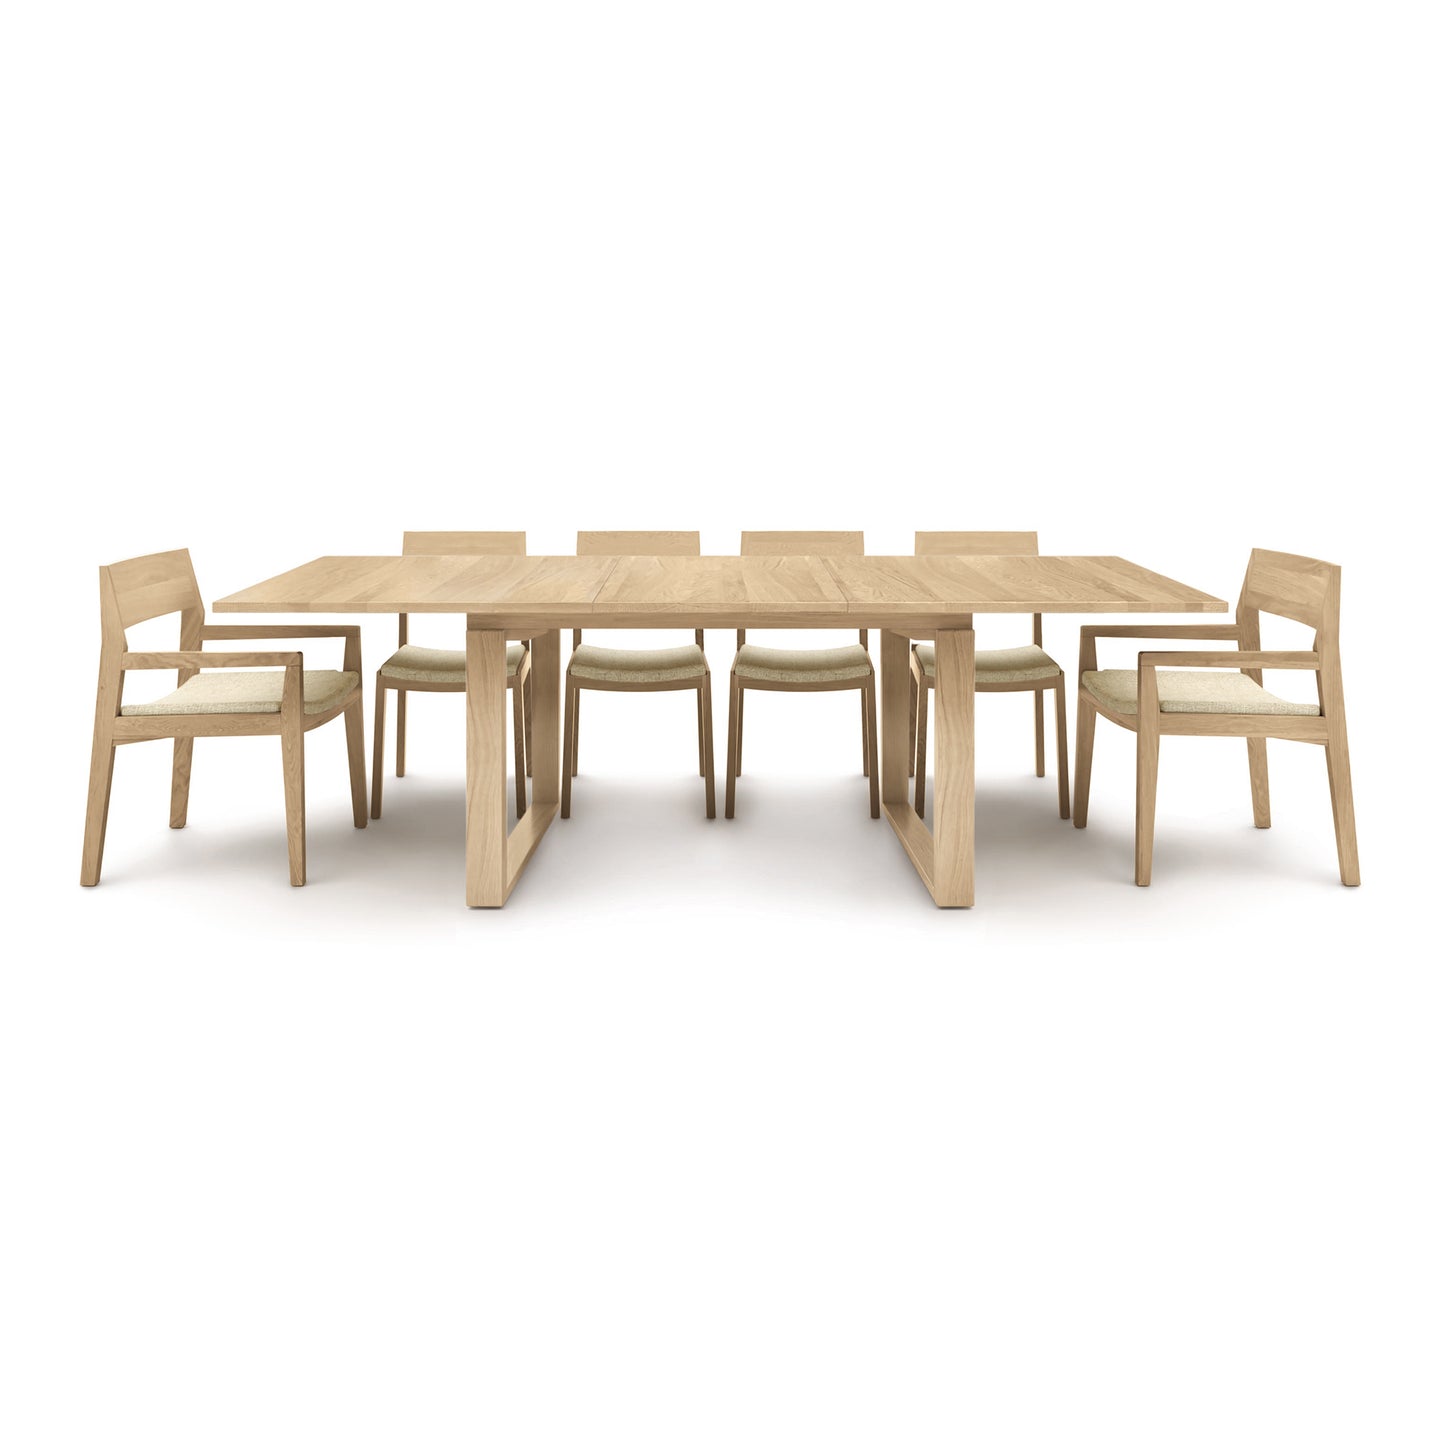 A solid oak Copeland Furniture Iso Oak Extension Dining Table with six matching chairs arranged neatly around it on a plain white background.